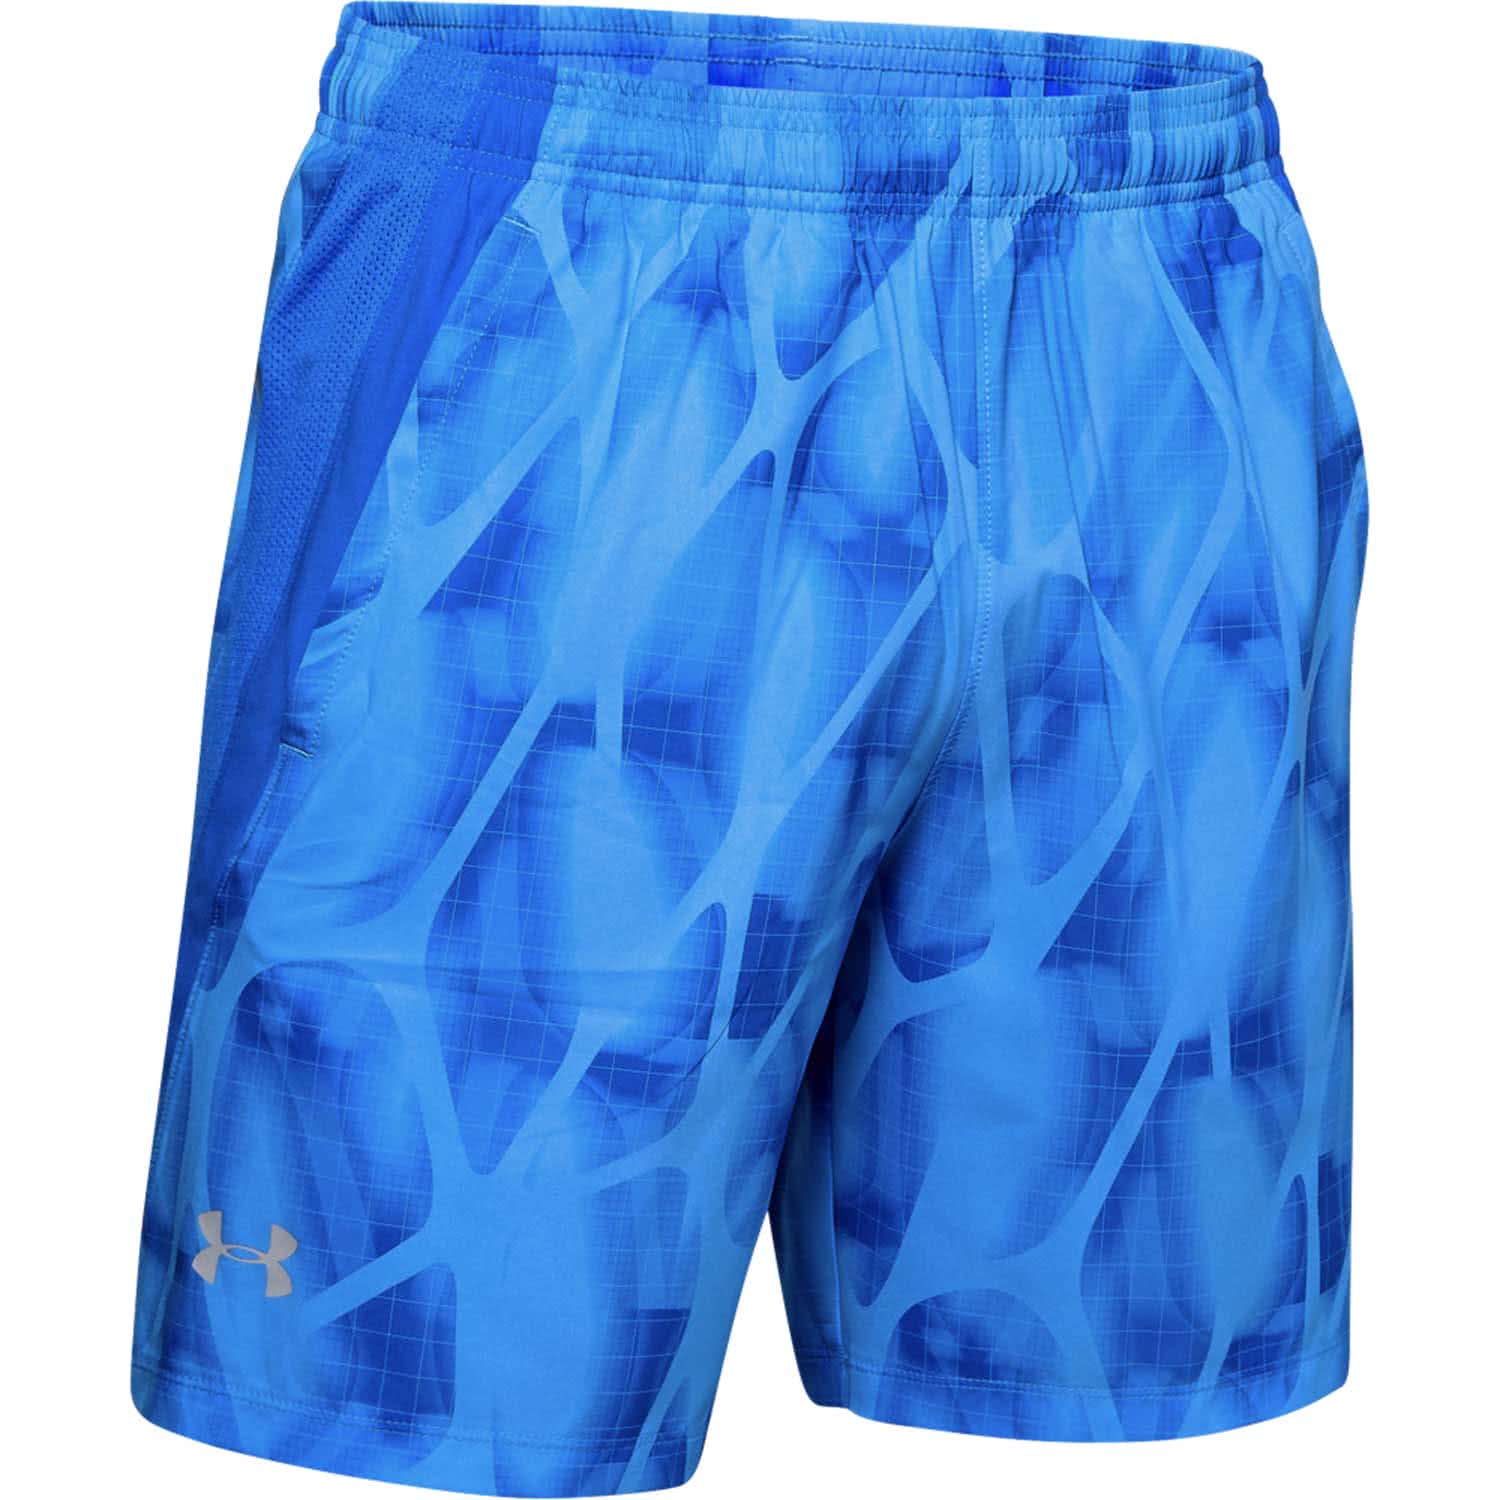 https://www.cortexpower.de/out/pictures/generated/product/1/1500_1500_75/under-armour-launch-sw-waterversa-bluereflective-1326573-464.jpg